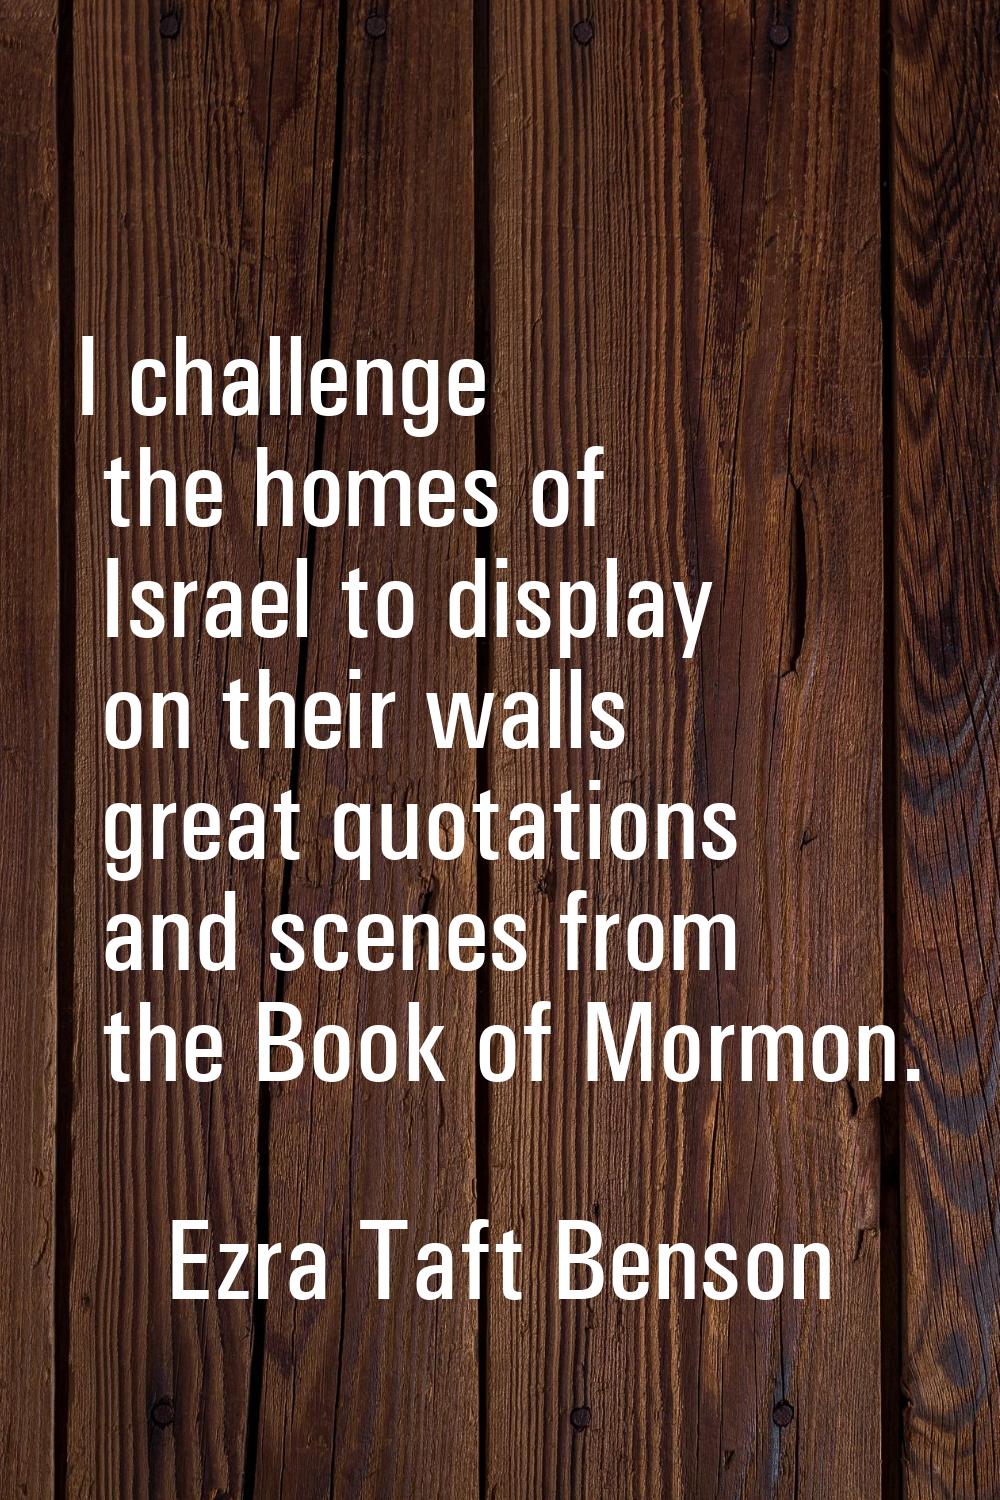 I challenge the homes of Israel to display on their walls great quotations and scenes from the Book